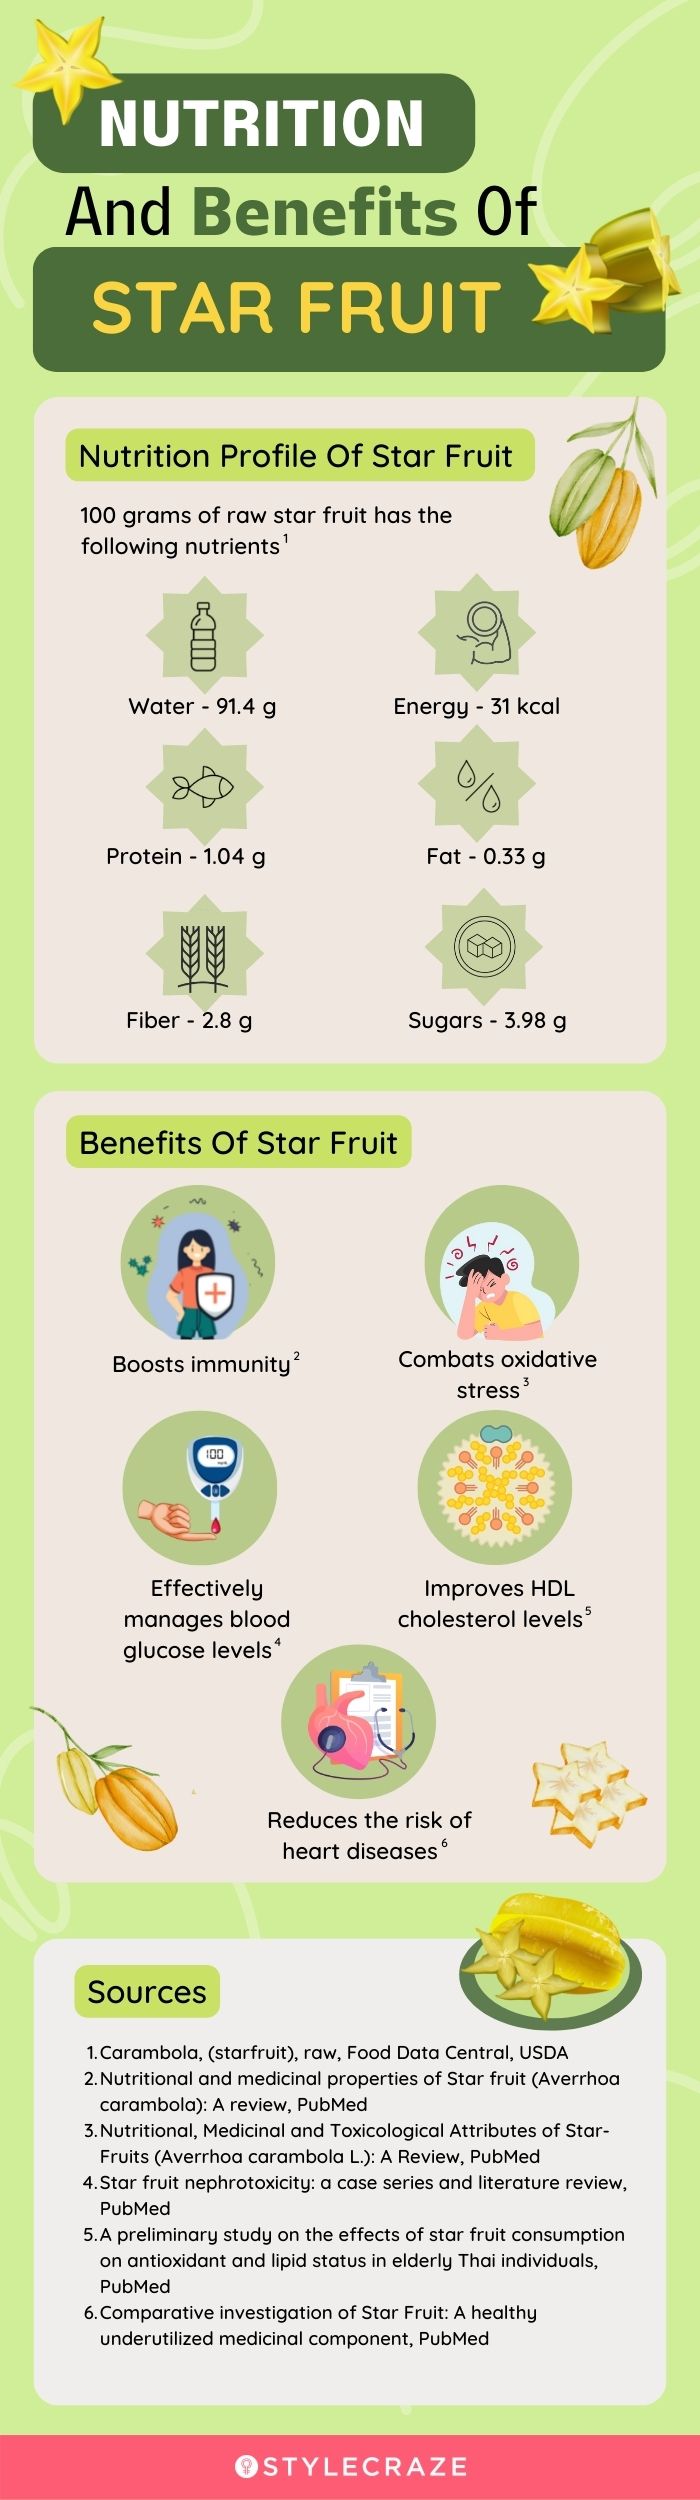 nutrition and benefits of star fruit (infographic)